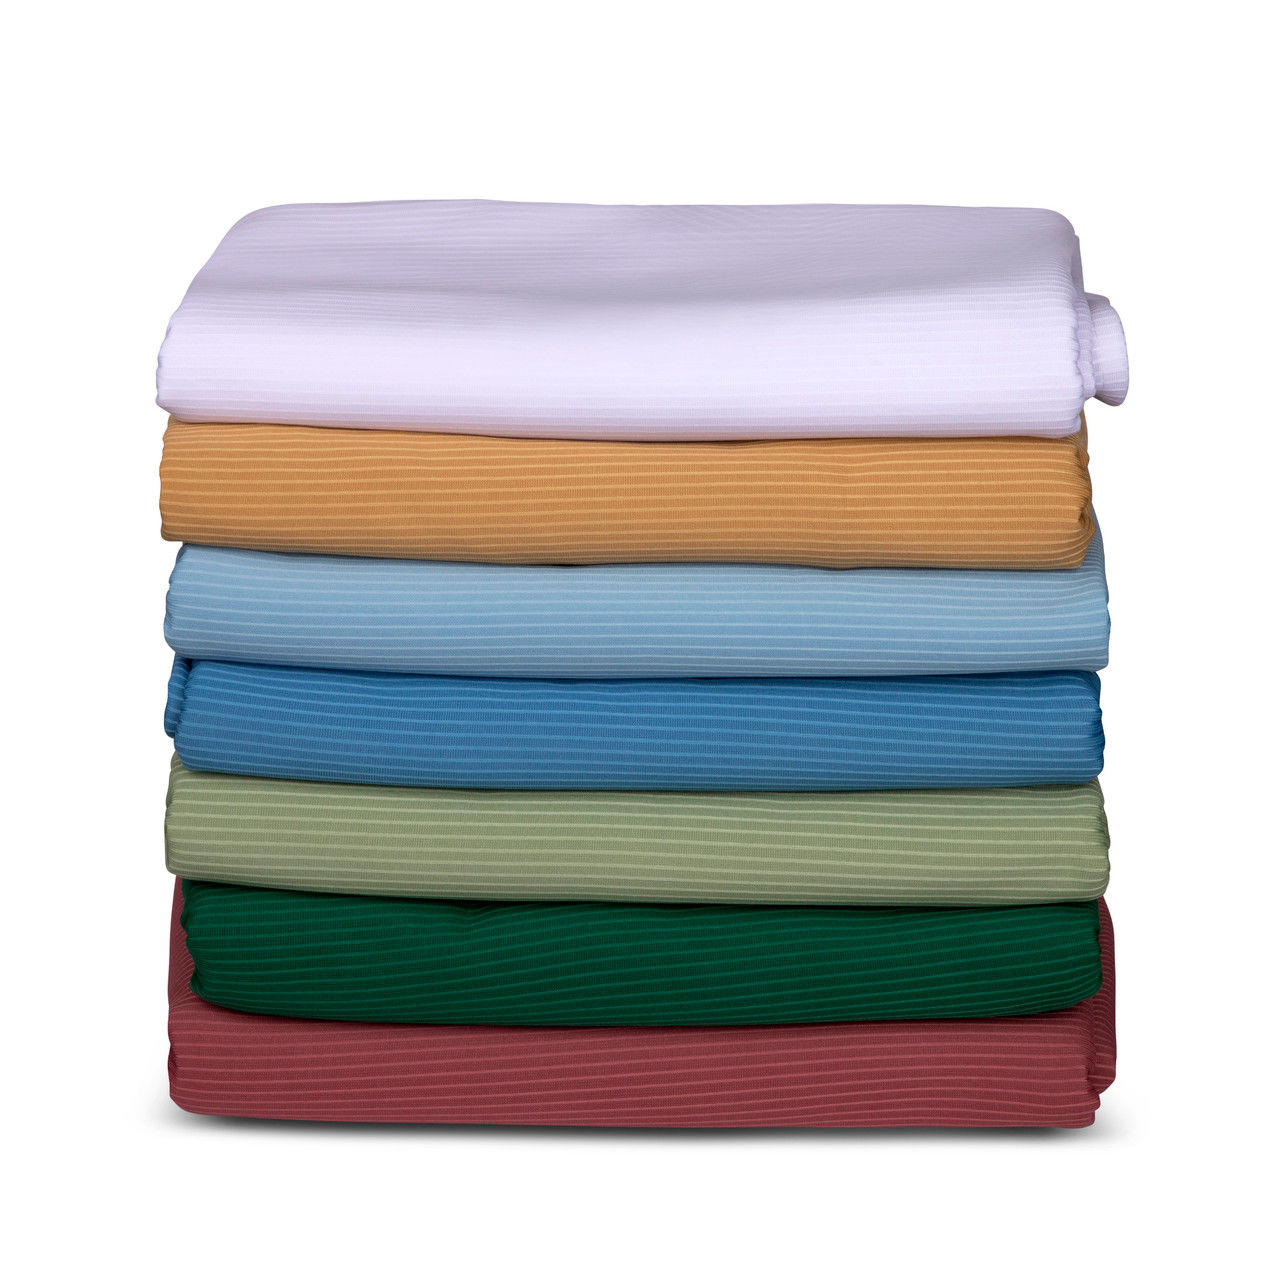 In what colors is the ribcord bedspread twin from Concord Ribcord available?